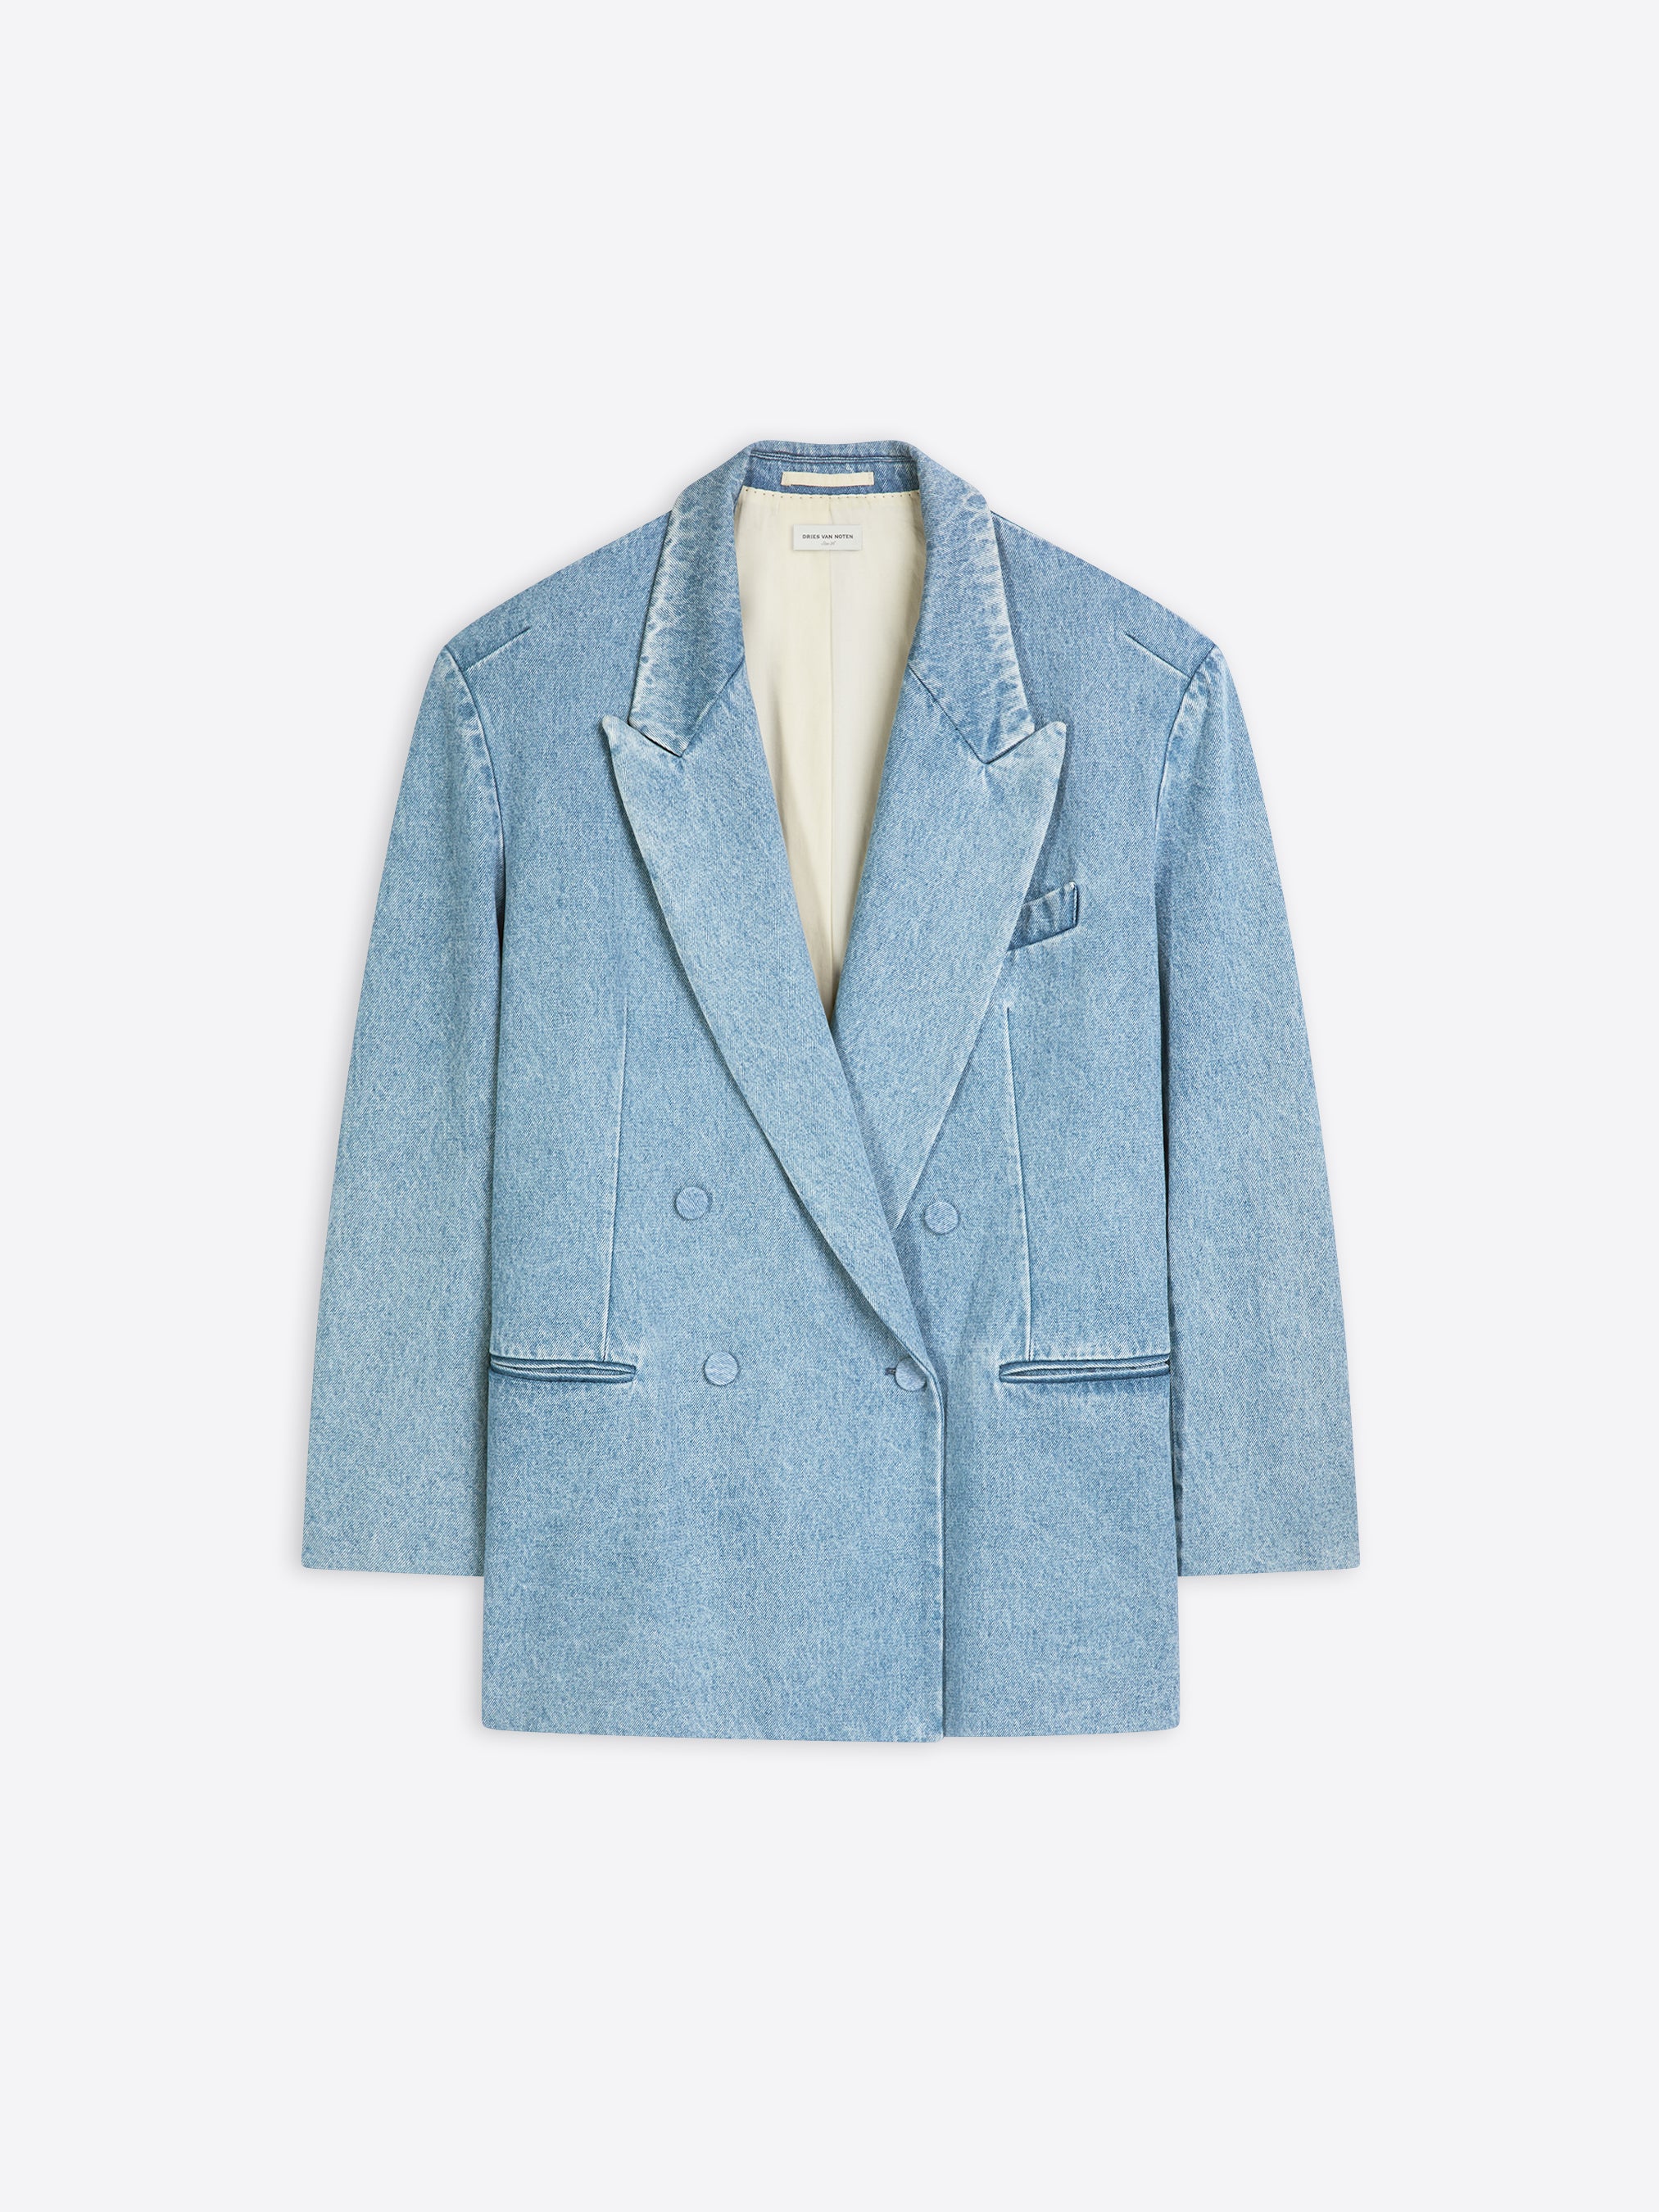 HERE TO STAND OUT EMBELLISHED DENIM BLAZER in BLUE